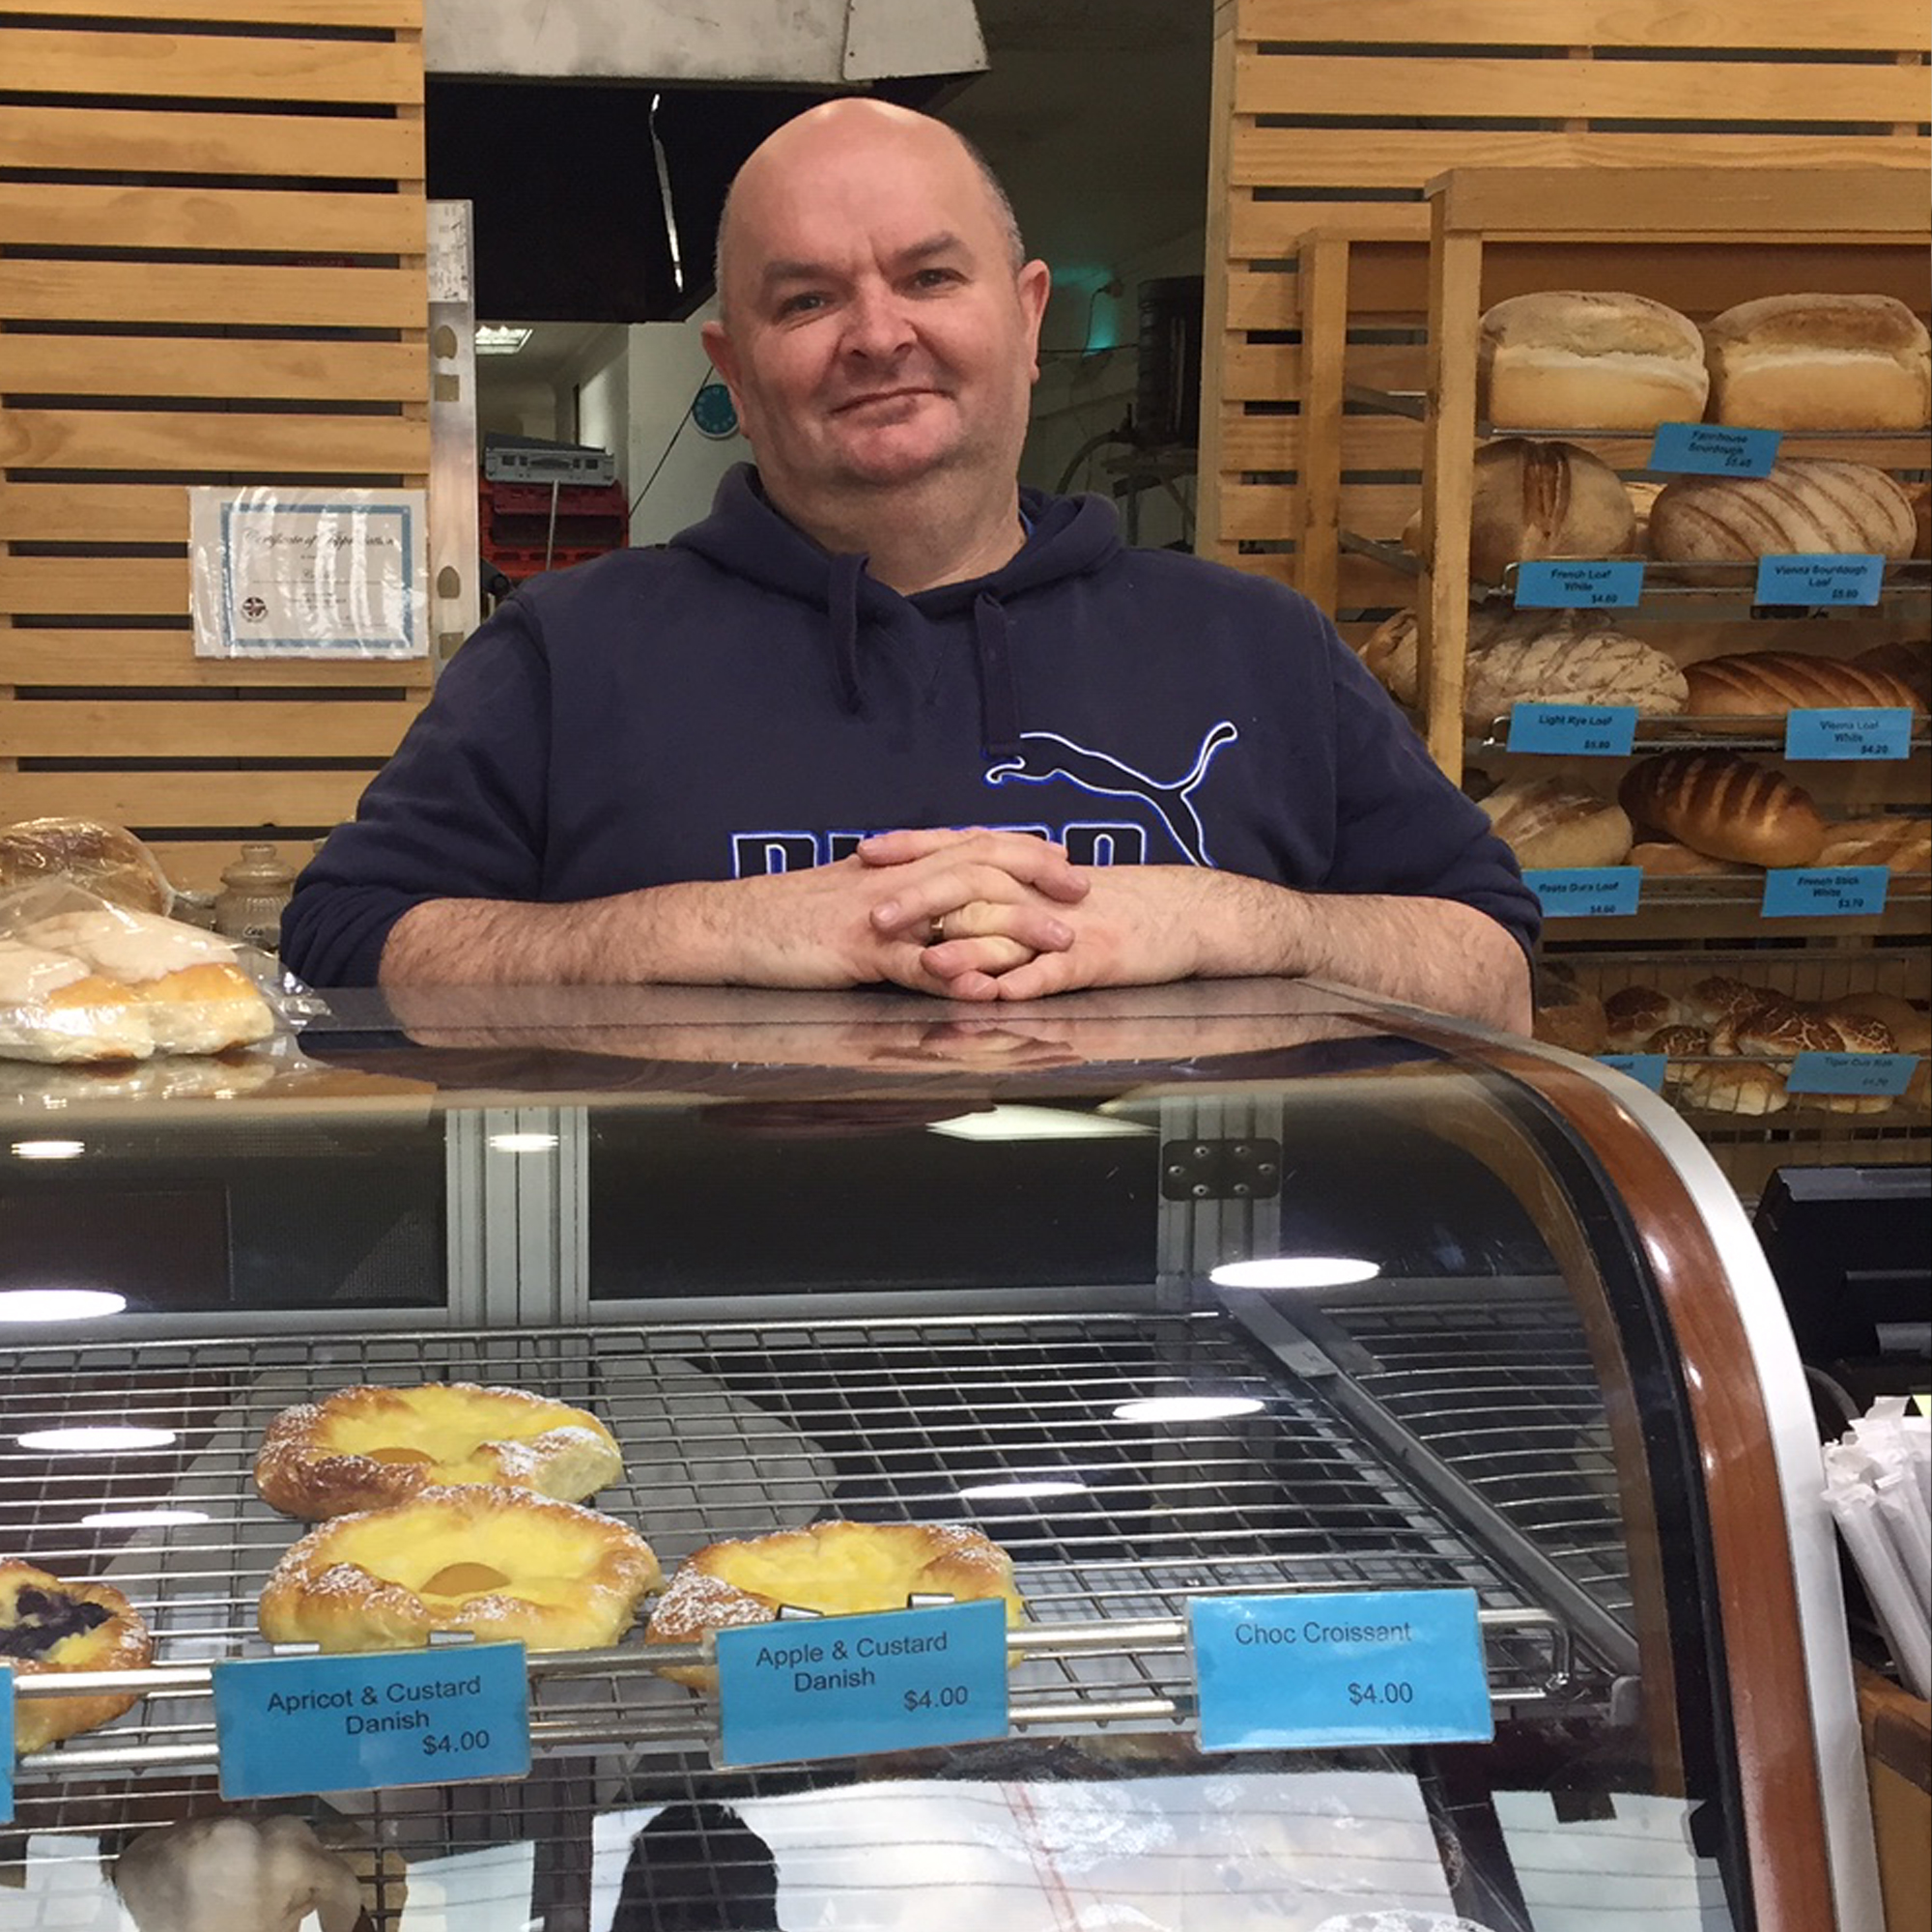 Dean with a small on his face and hand crossed standing behind a glass cabinet in a bakery with bread behind him on trays